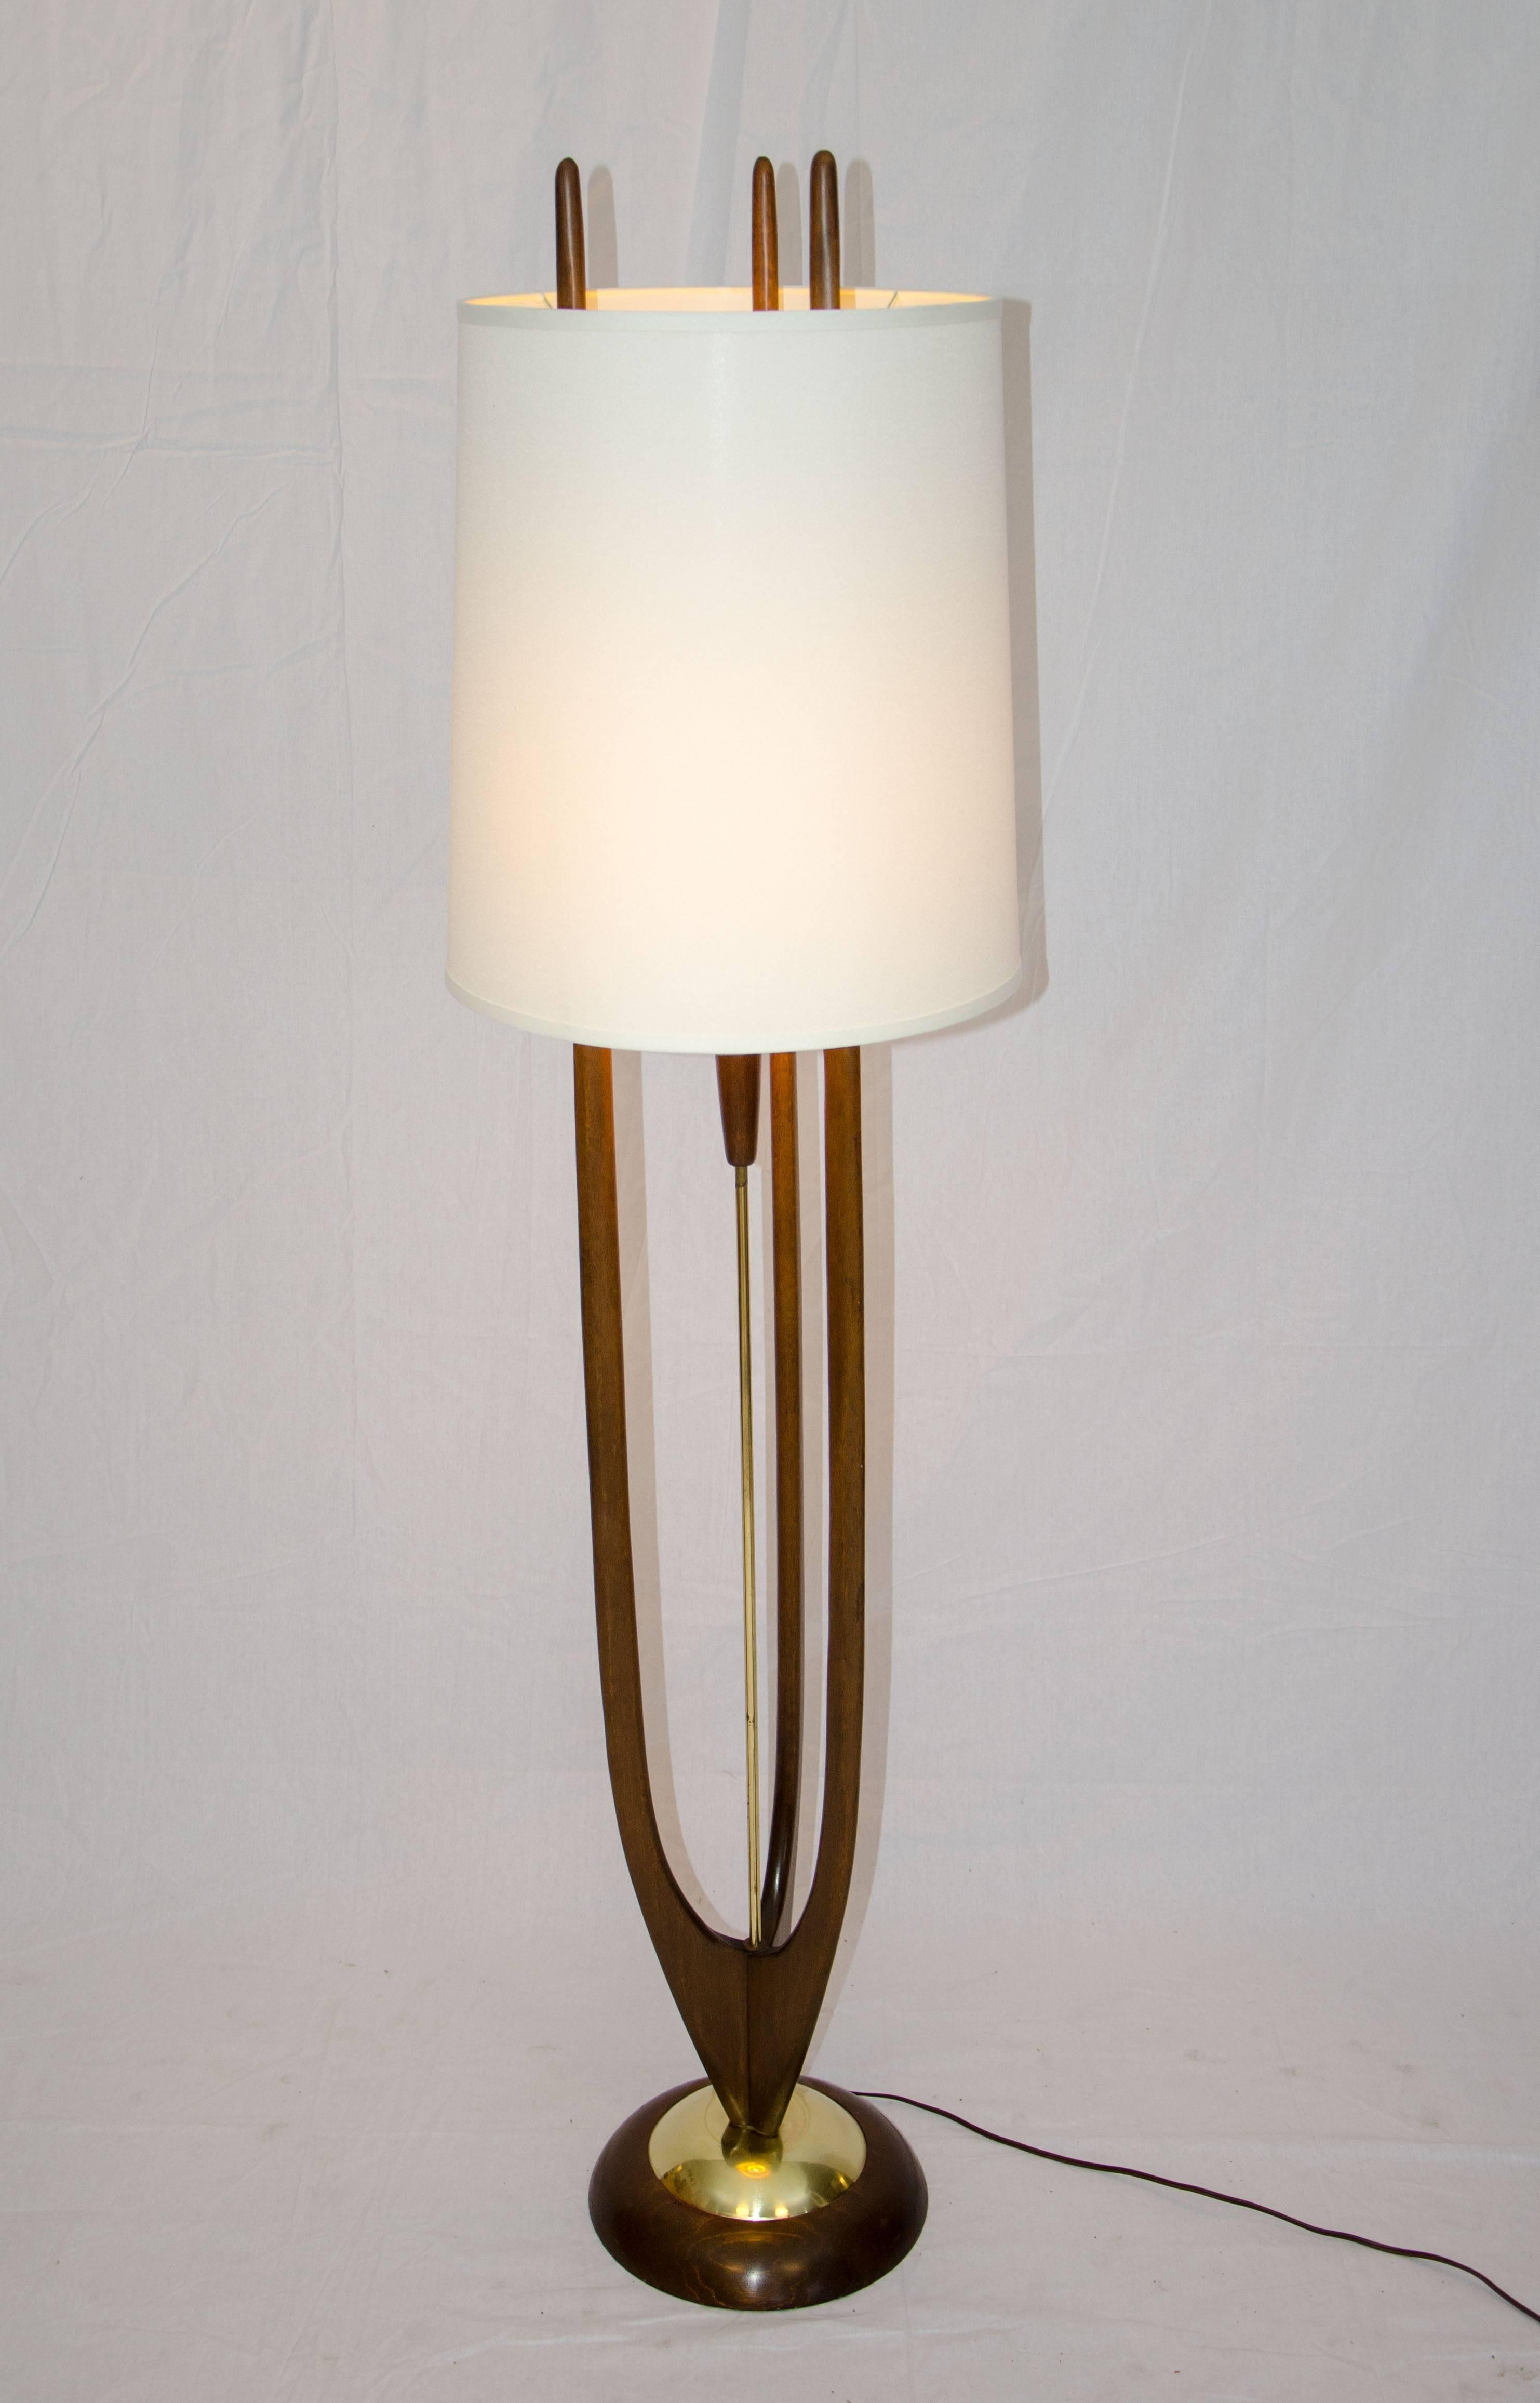 Very nice design floor lamp by the popular Modeline Lamp Co. The wood base is accented by a smaller brass circle. The center brass post holds the electrical cord; the original interior shade is positioned in the center of three walnut posts. The on